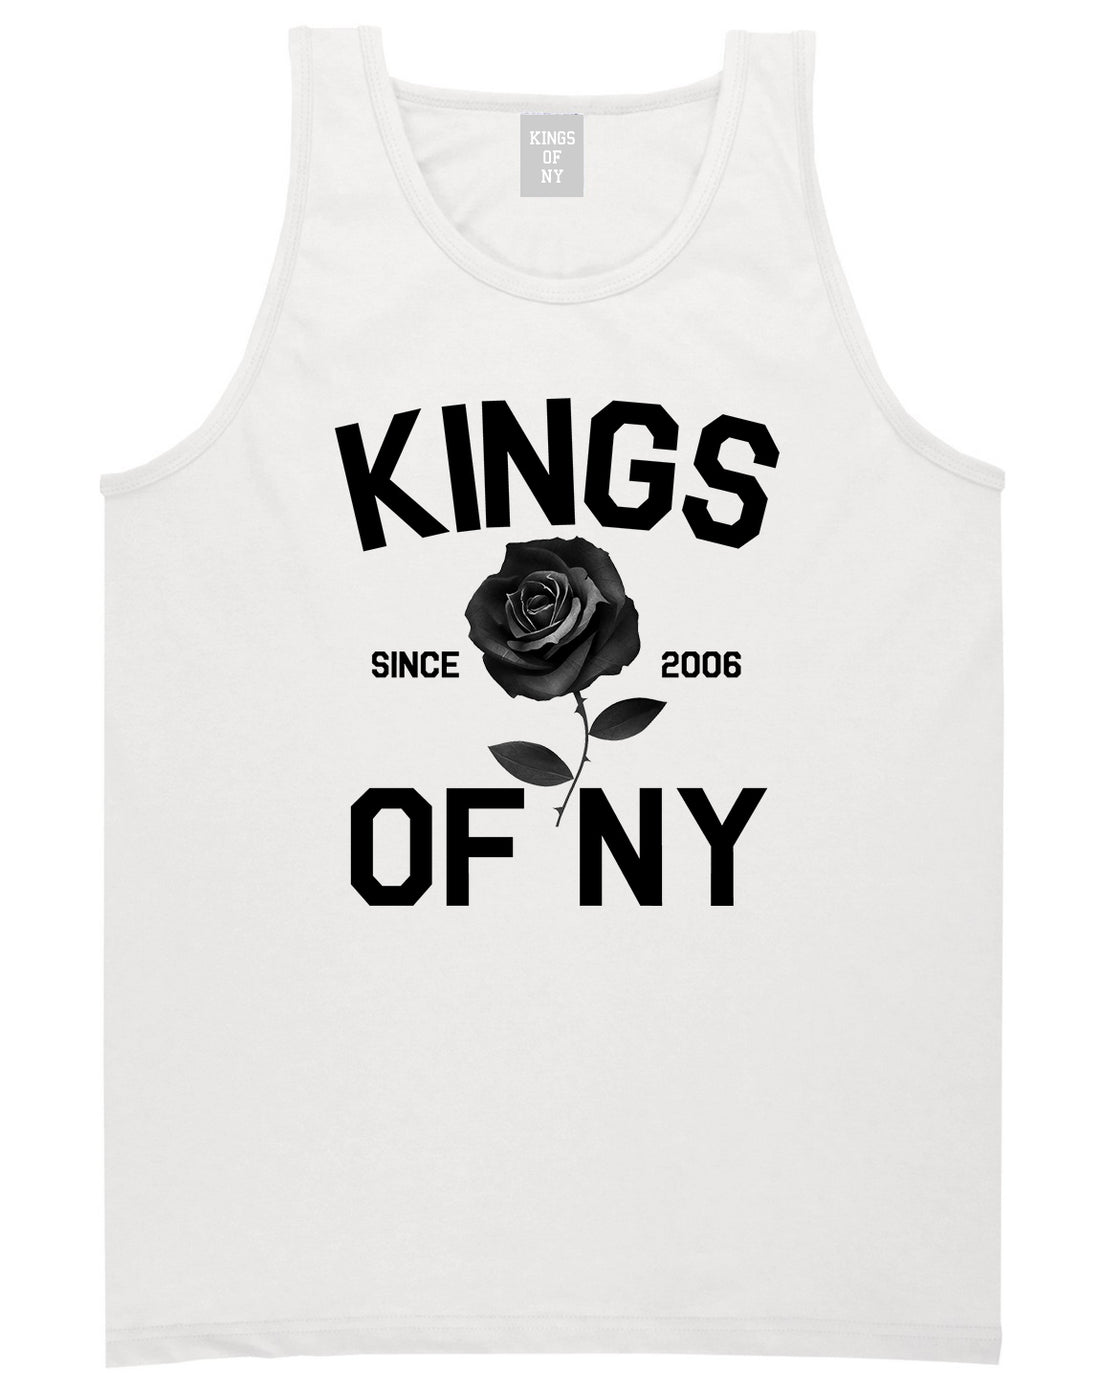 Black Rose Since 2006 Mens Tank Top Shirt White by Kings Of NY